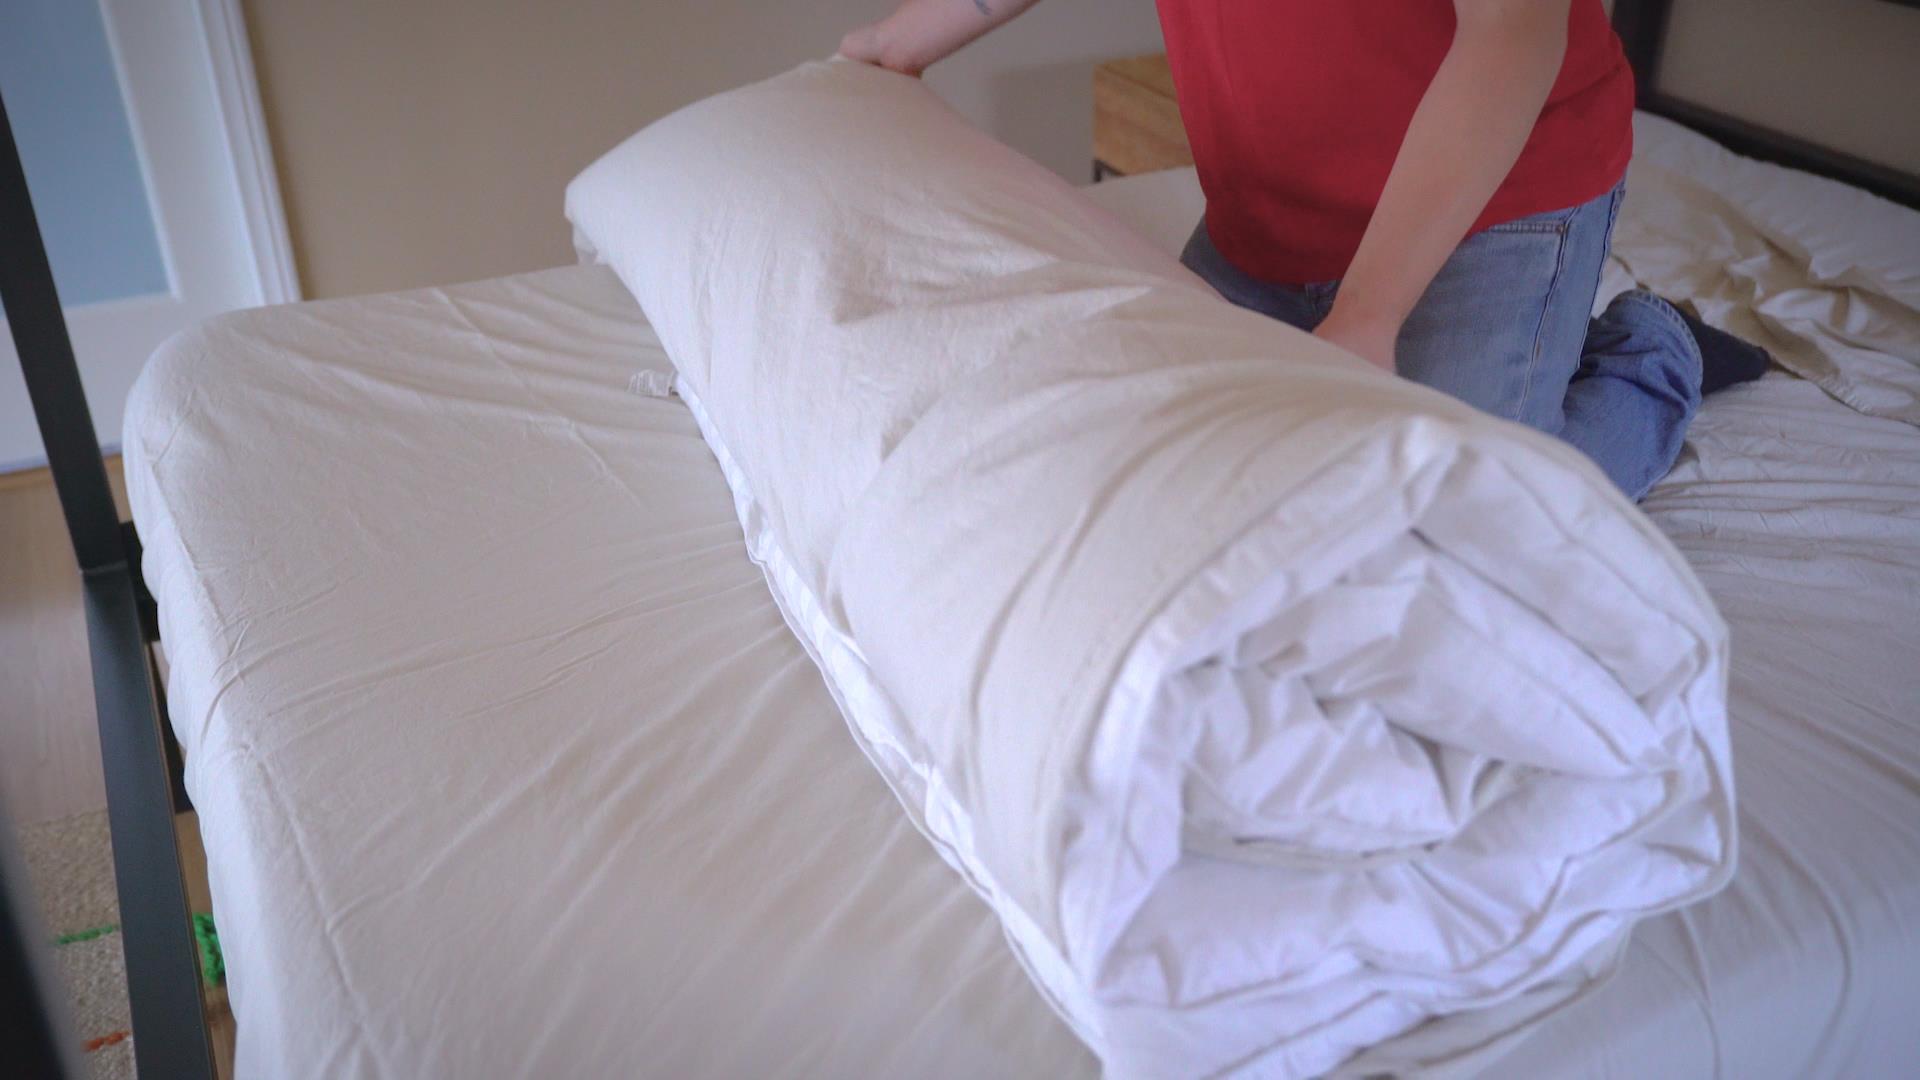 How to change a duvet cover without losing your mind.